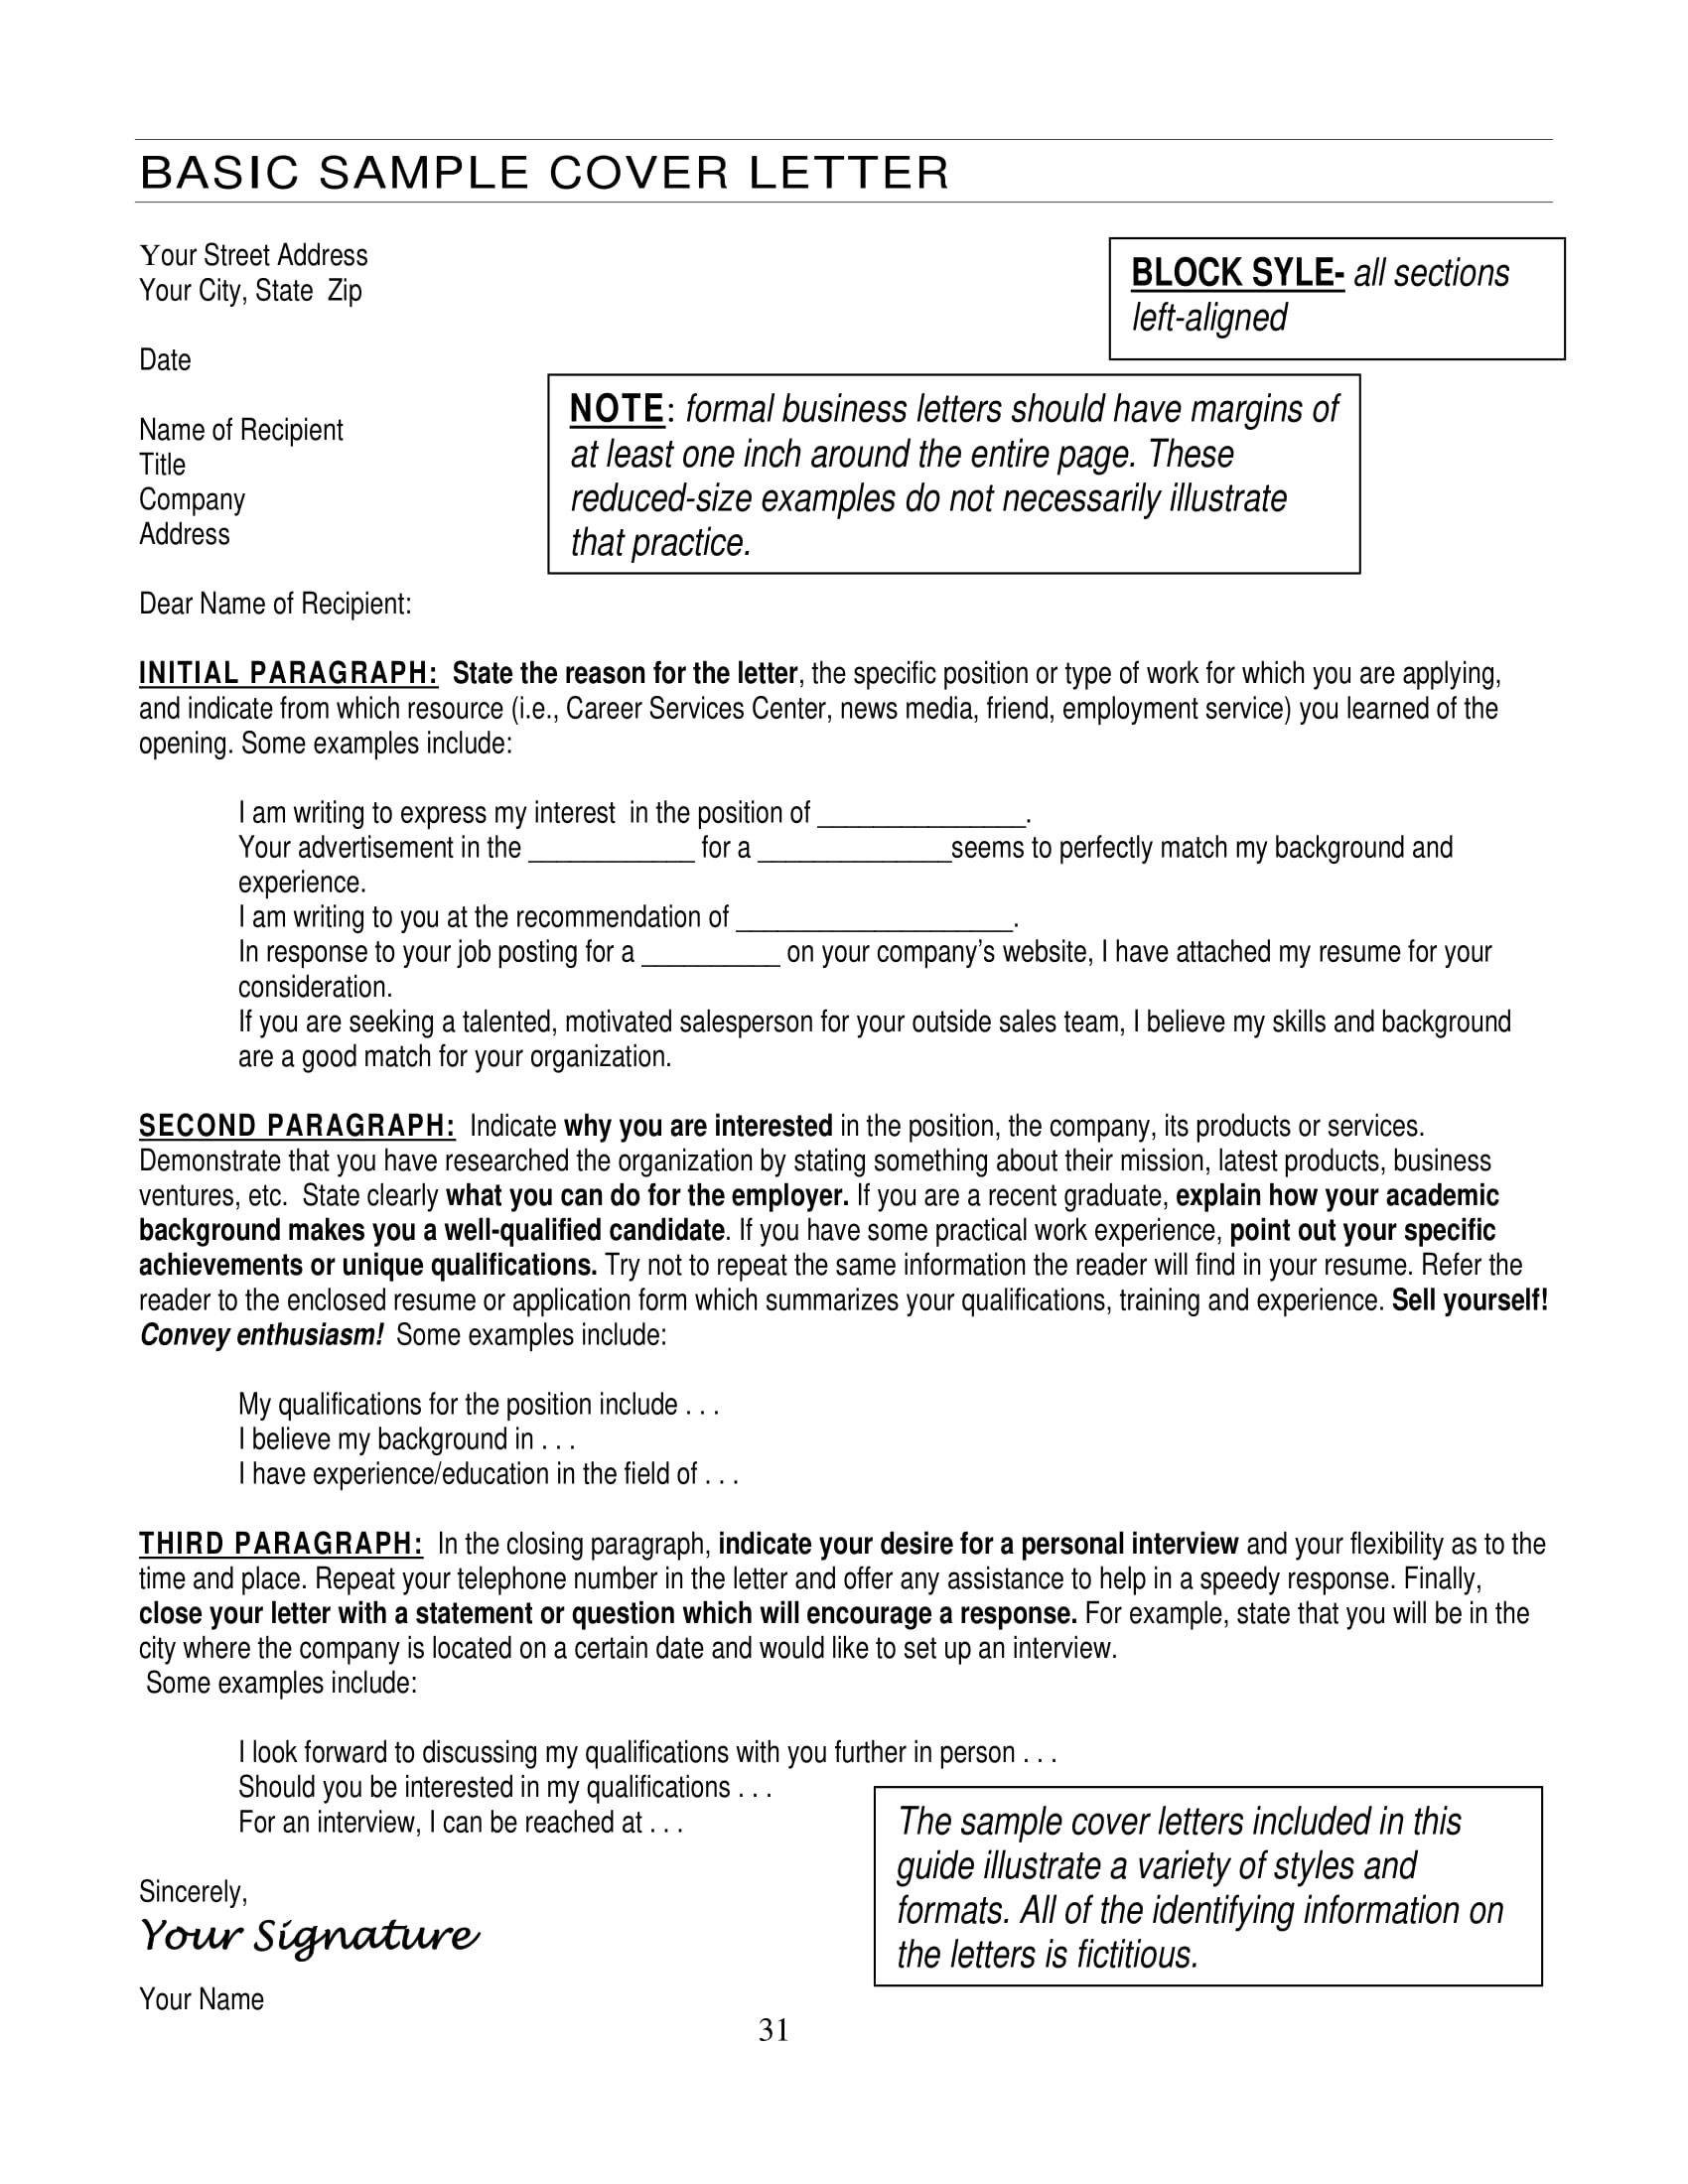 2018 Cover Letter Examples from images.examples.com